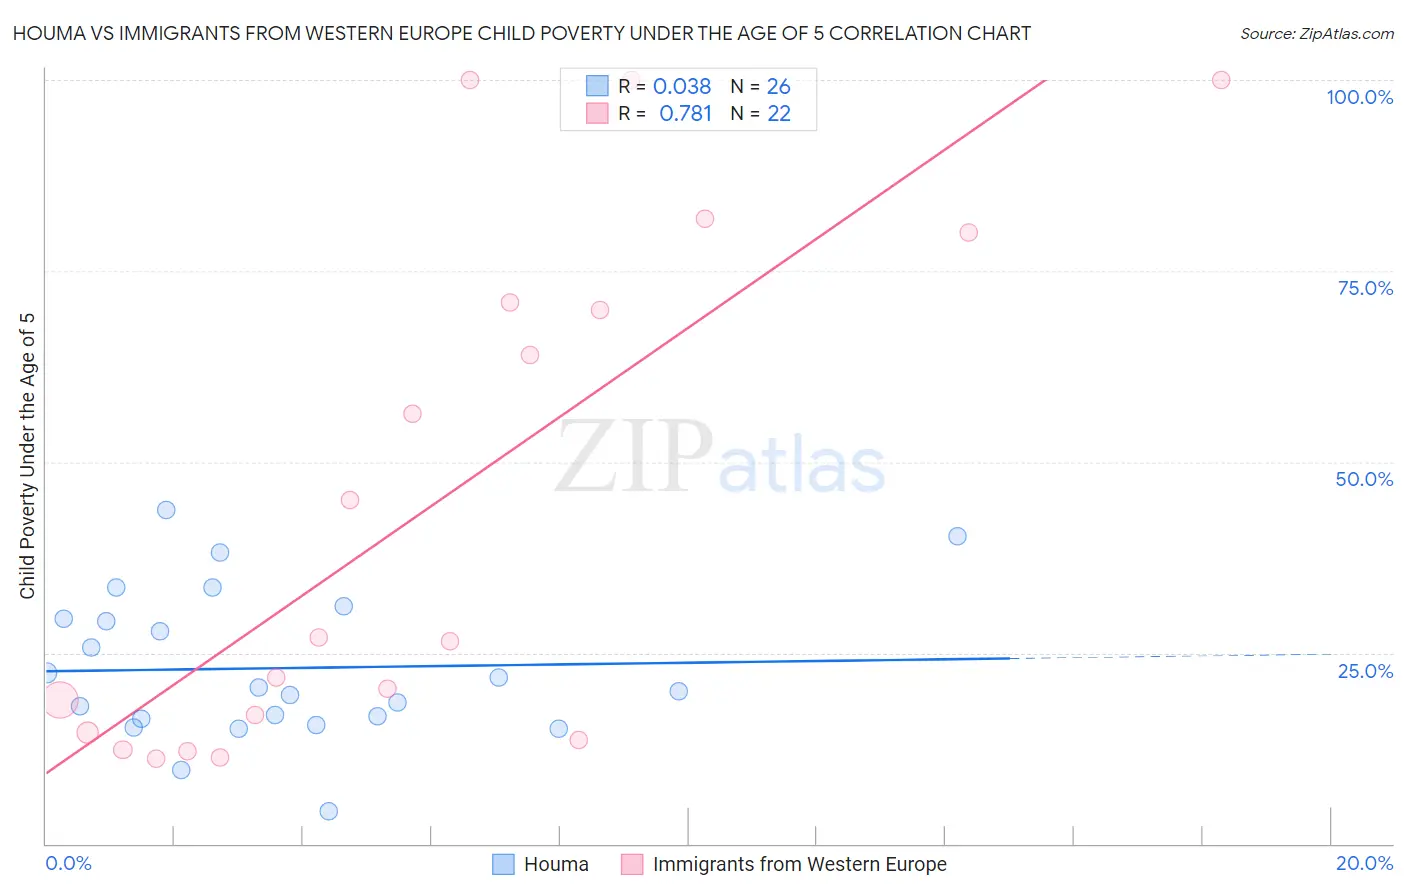 Houma vs Immigrants from Western Europe Child Poverty Under the Age of 5